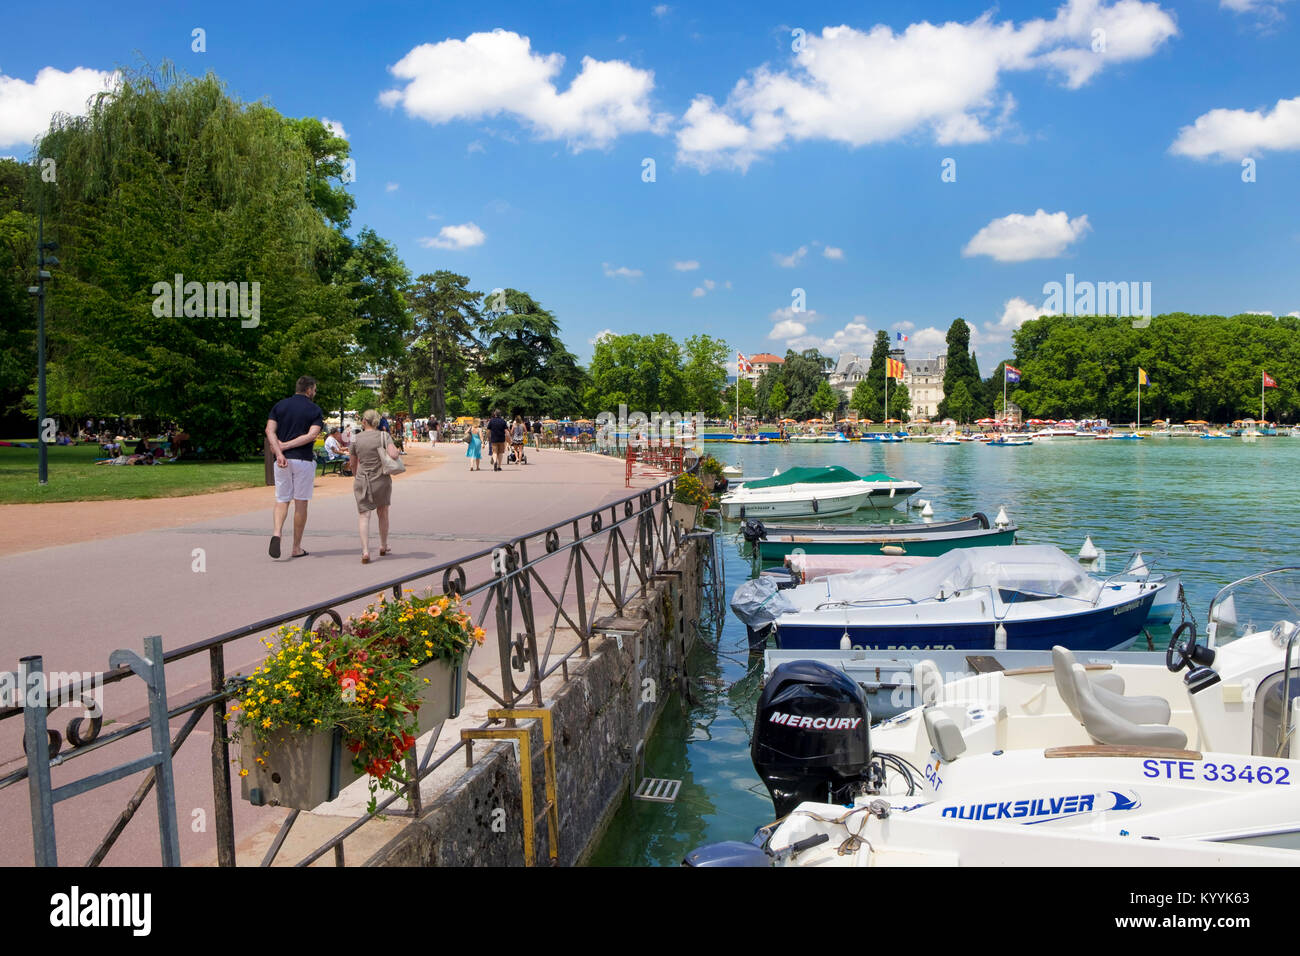 The Lakeside promenade at Annecy Lake, Lac d'Annecy, Haute Savoie, France, Europe Stock Photo